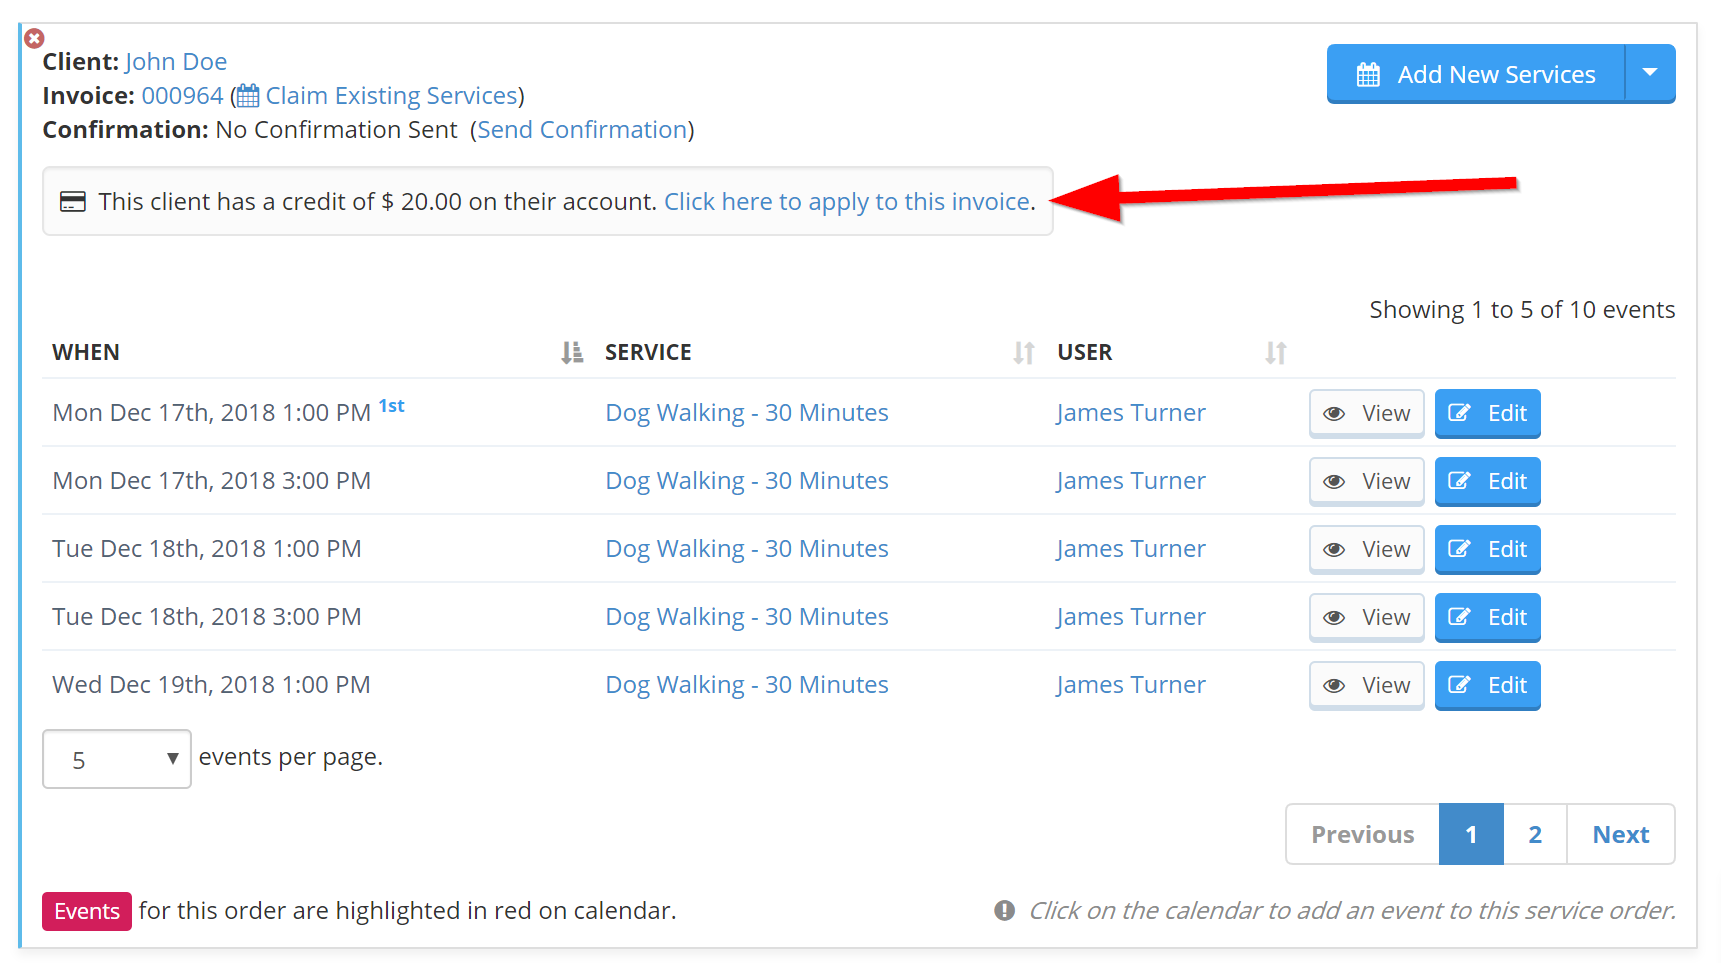 Redeeming Credit From Service Order in Scheduler